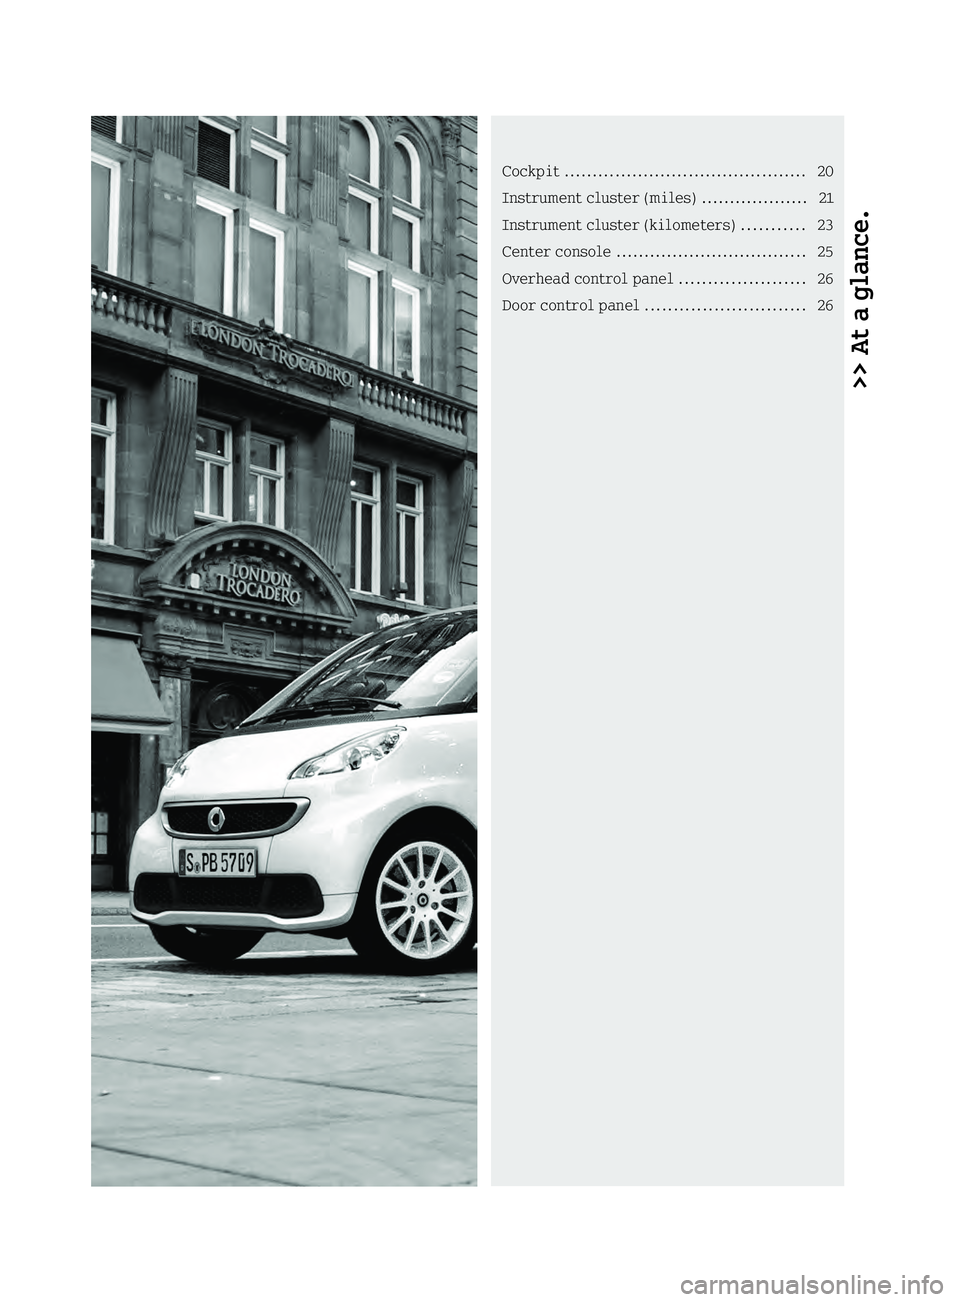 SMART FORTWO COUPE 2013 Owners Manual >> At a glance.Cockpit
........................................... 20
Instrument cluste r(miles) .................. .21
Instrument cluster (kilometers) ...........23
Center console ...................